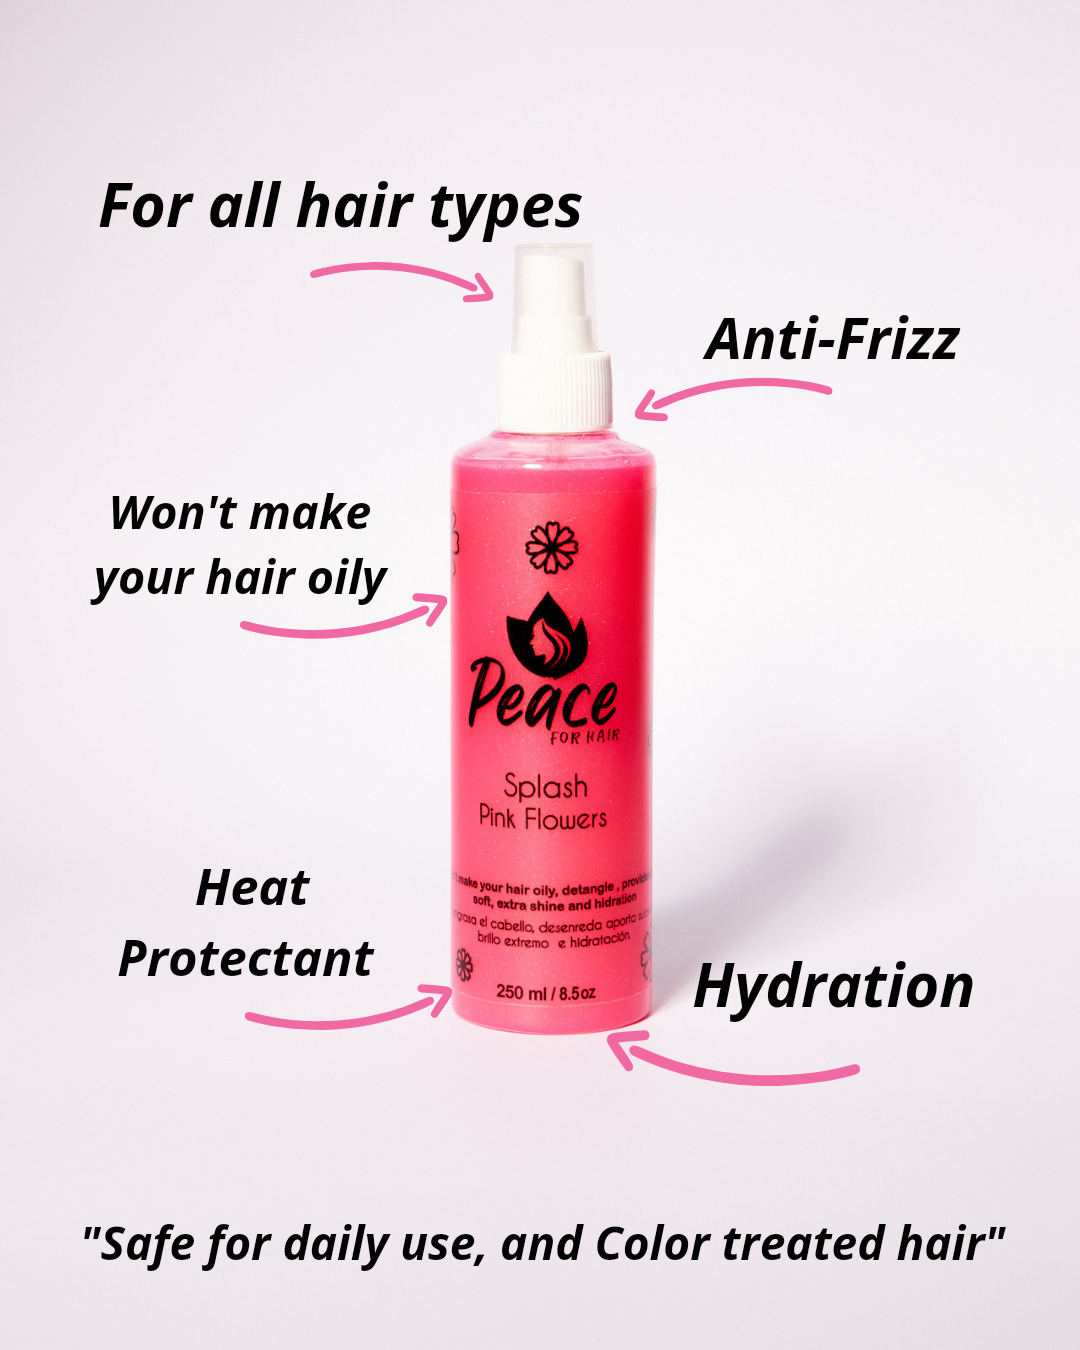 Pink Flowers "Peace For Hair" Spray.